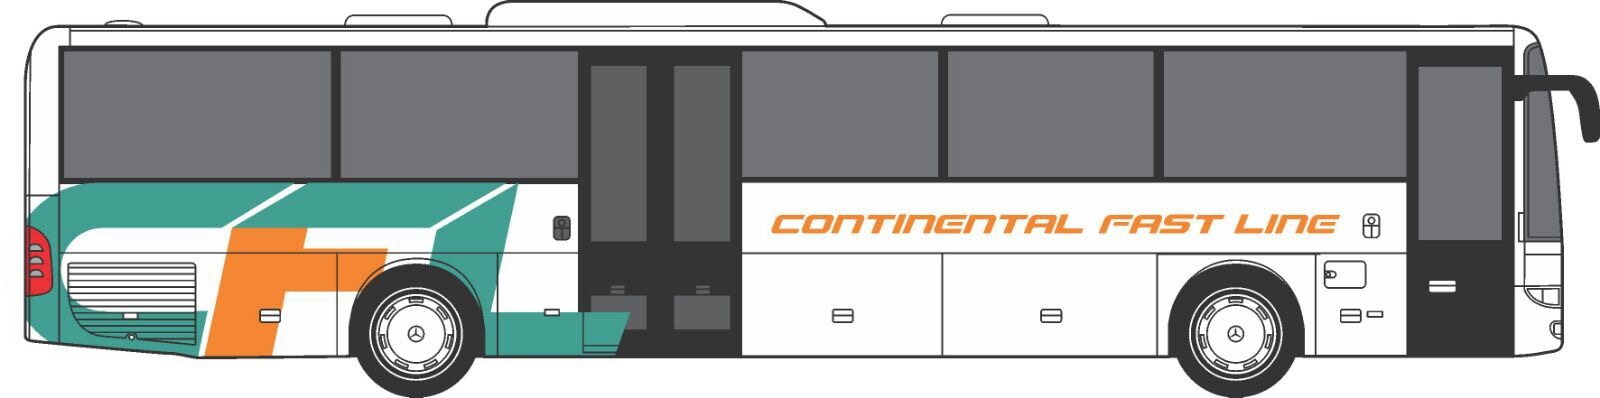 CONTINENTAL FAST LINE S.R.L. undefined: kuva CONTINENTAL FAST LINE S.R.L. undefined